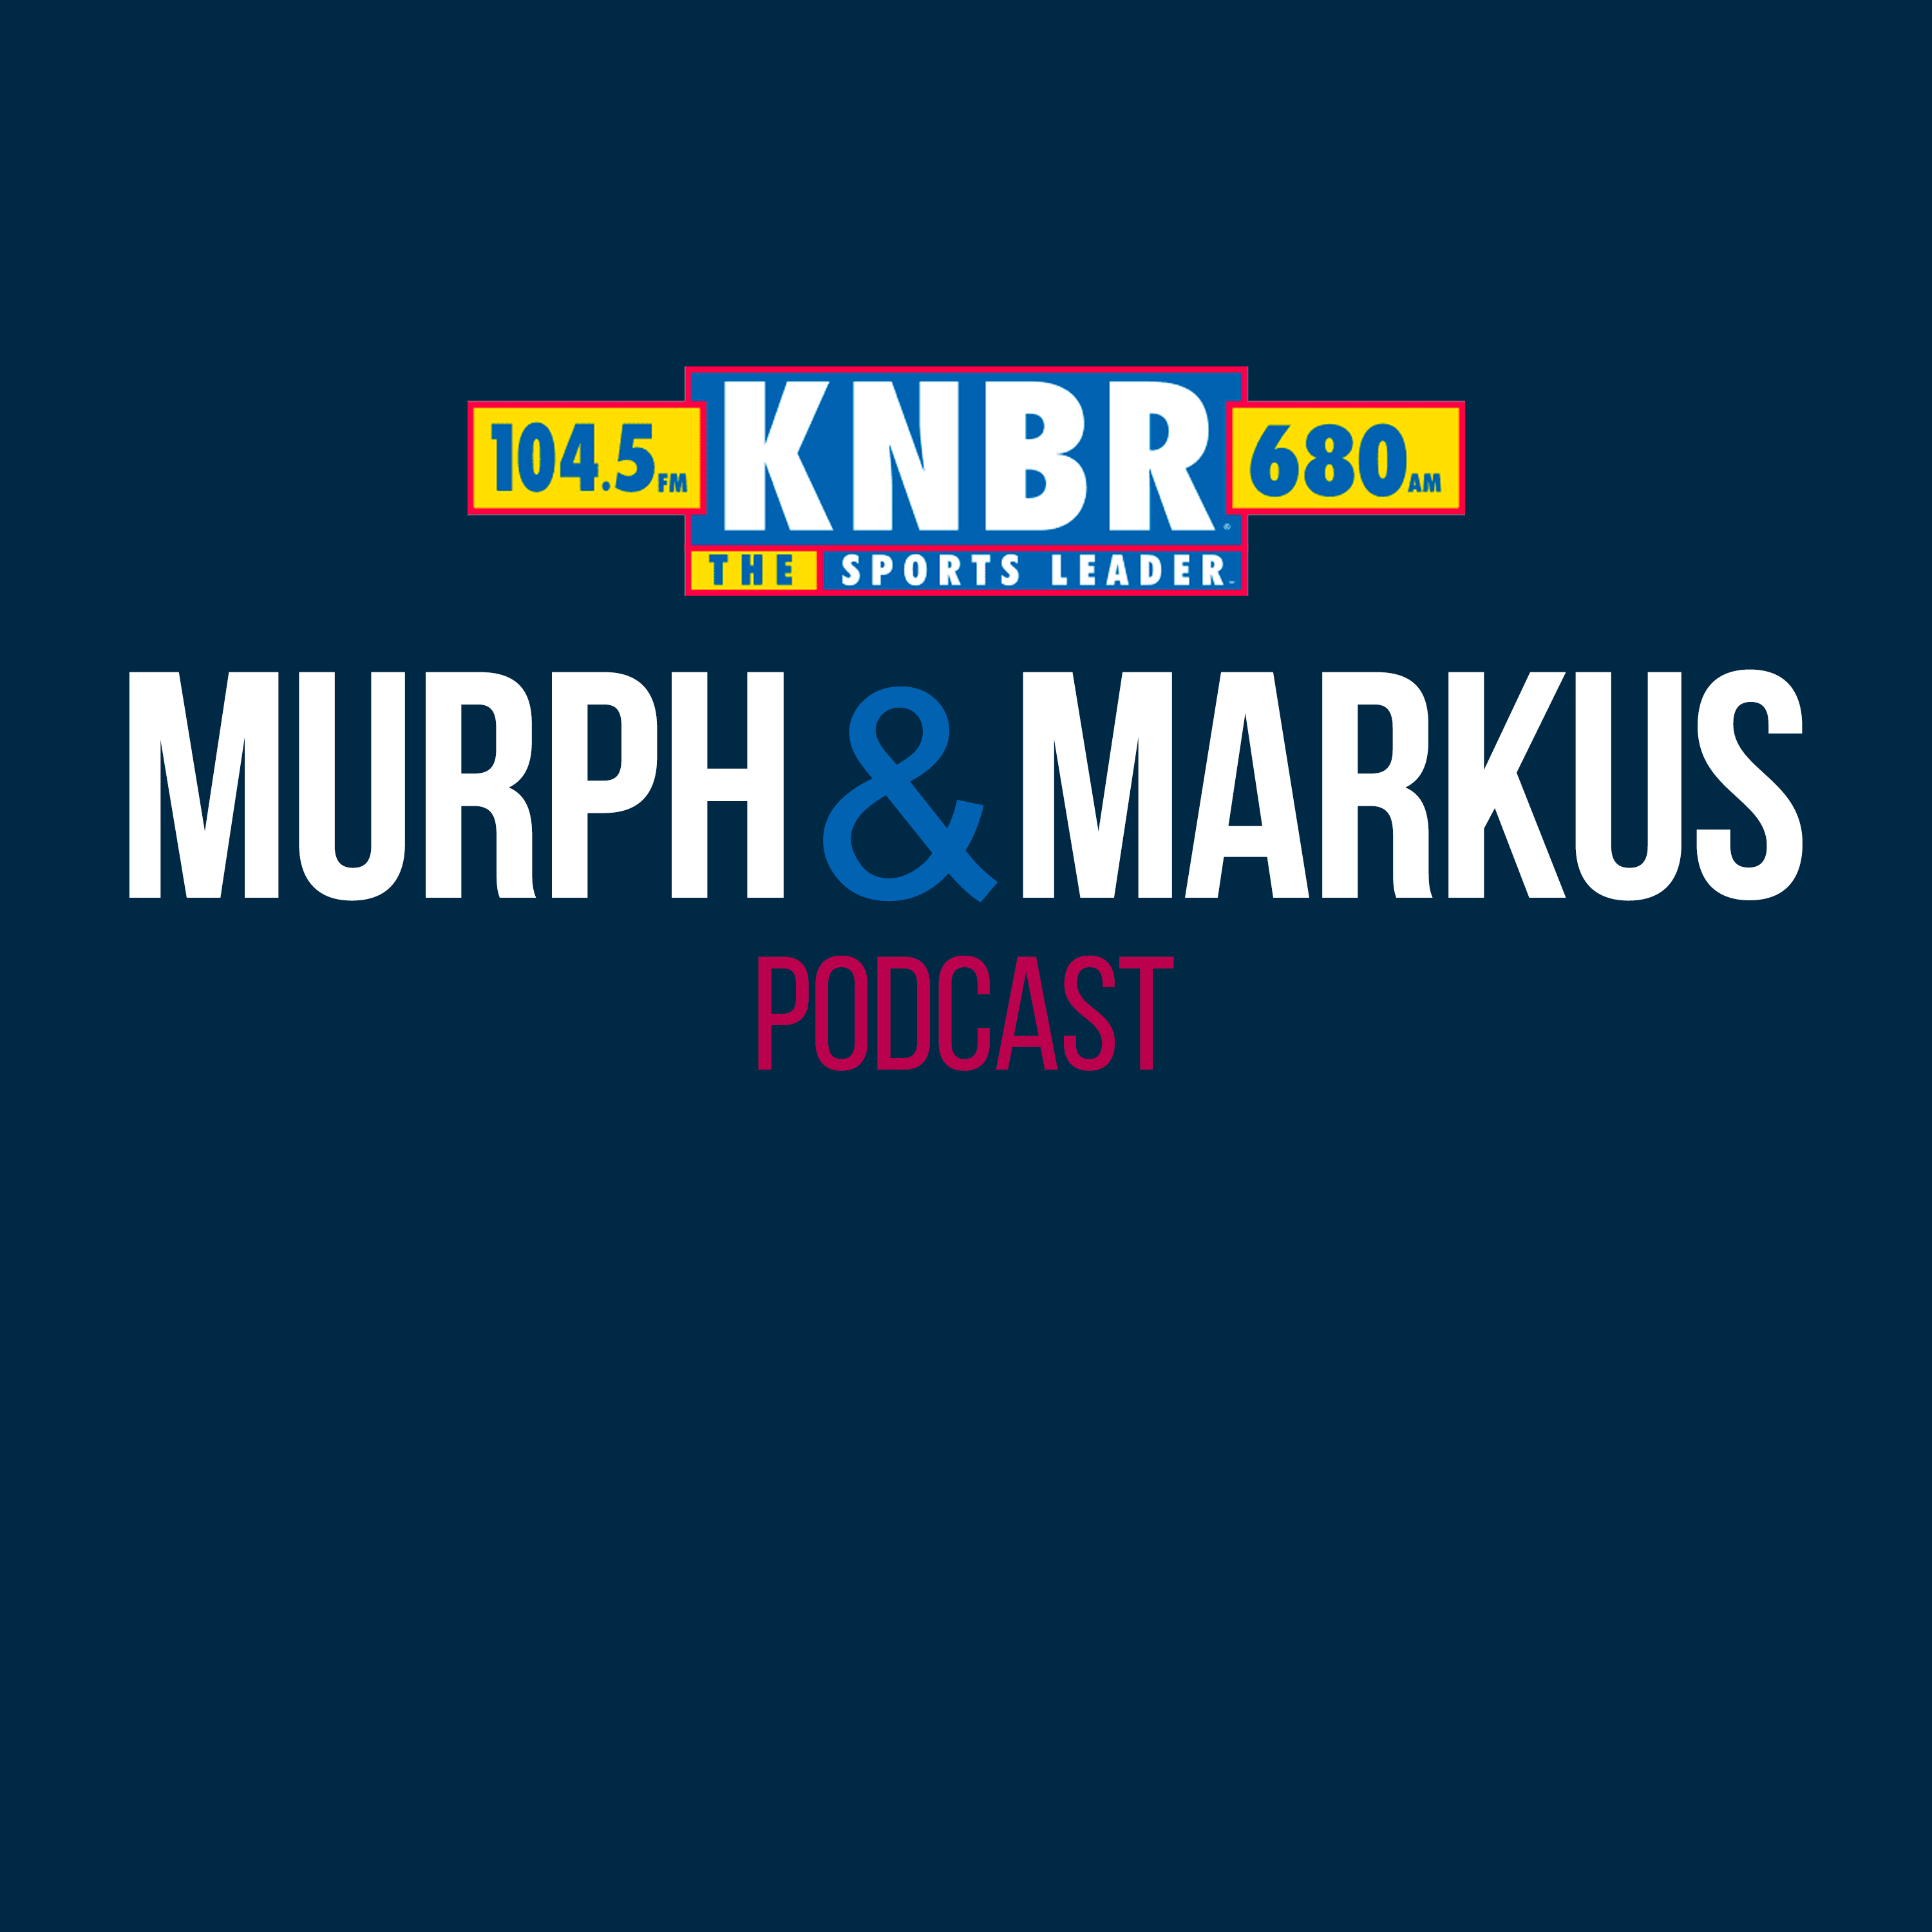 5-10 Alex Pavlovic joins Murph & Markus to give his perspective on what went wrong on the Giants road trip and to discuss why the have a 17-22 record